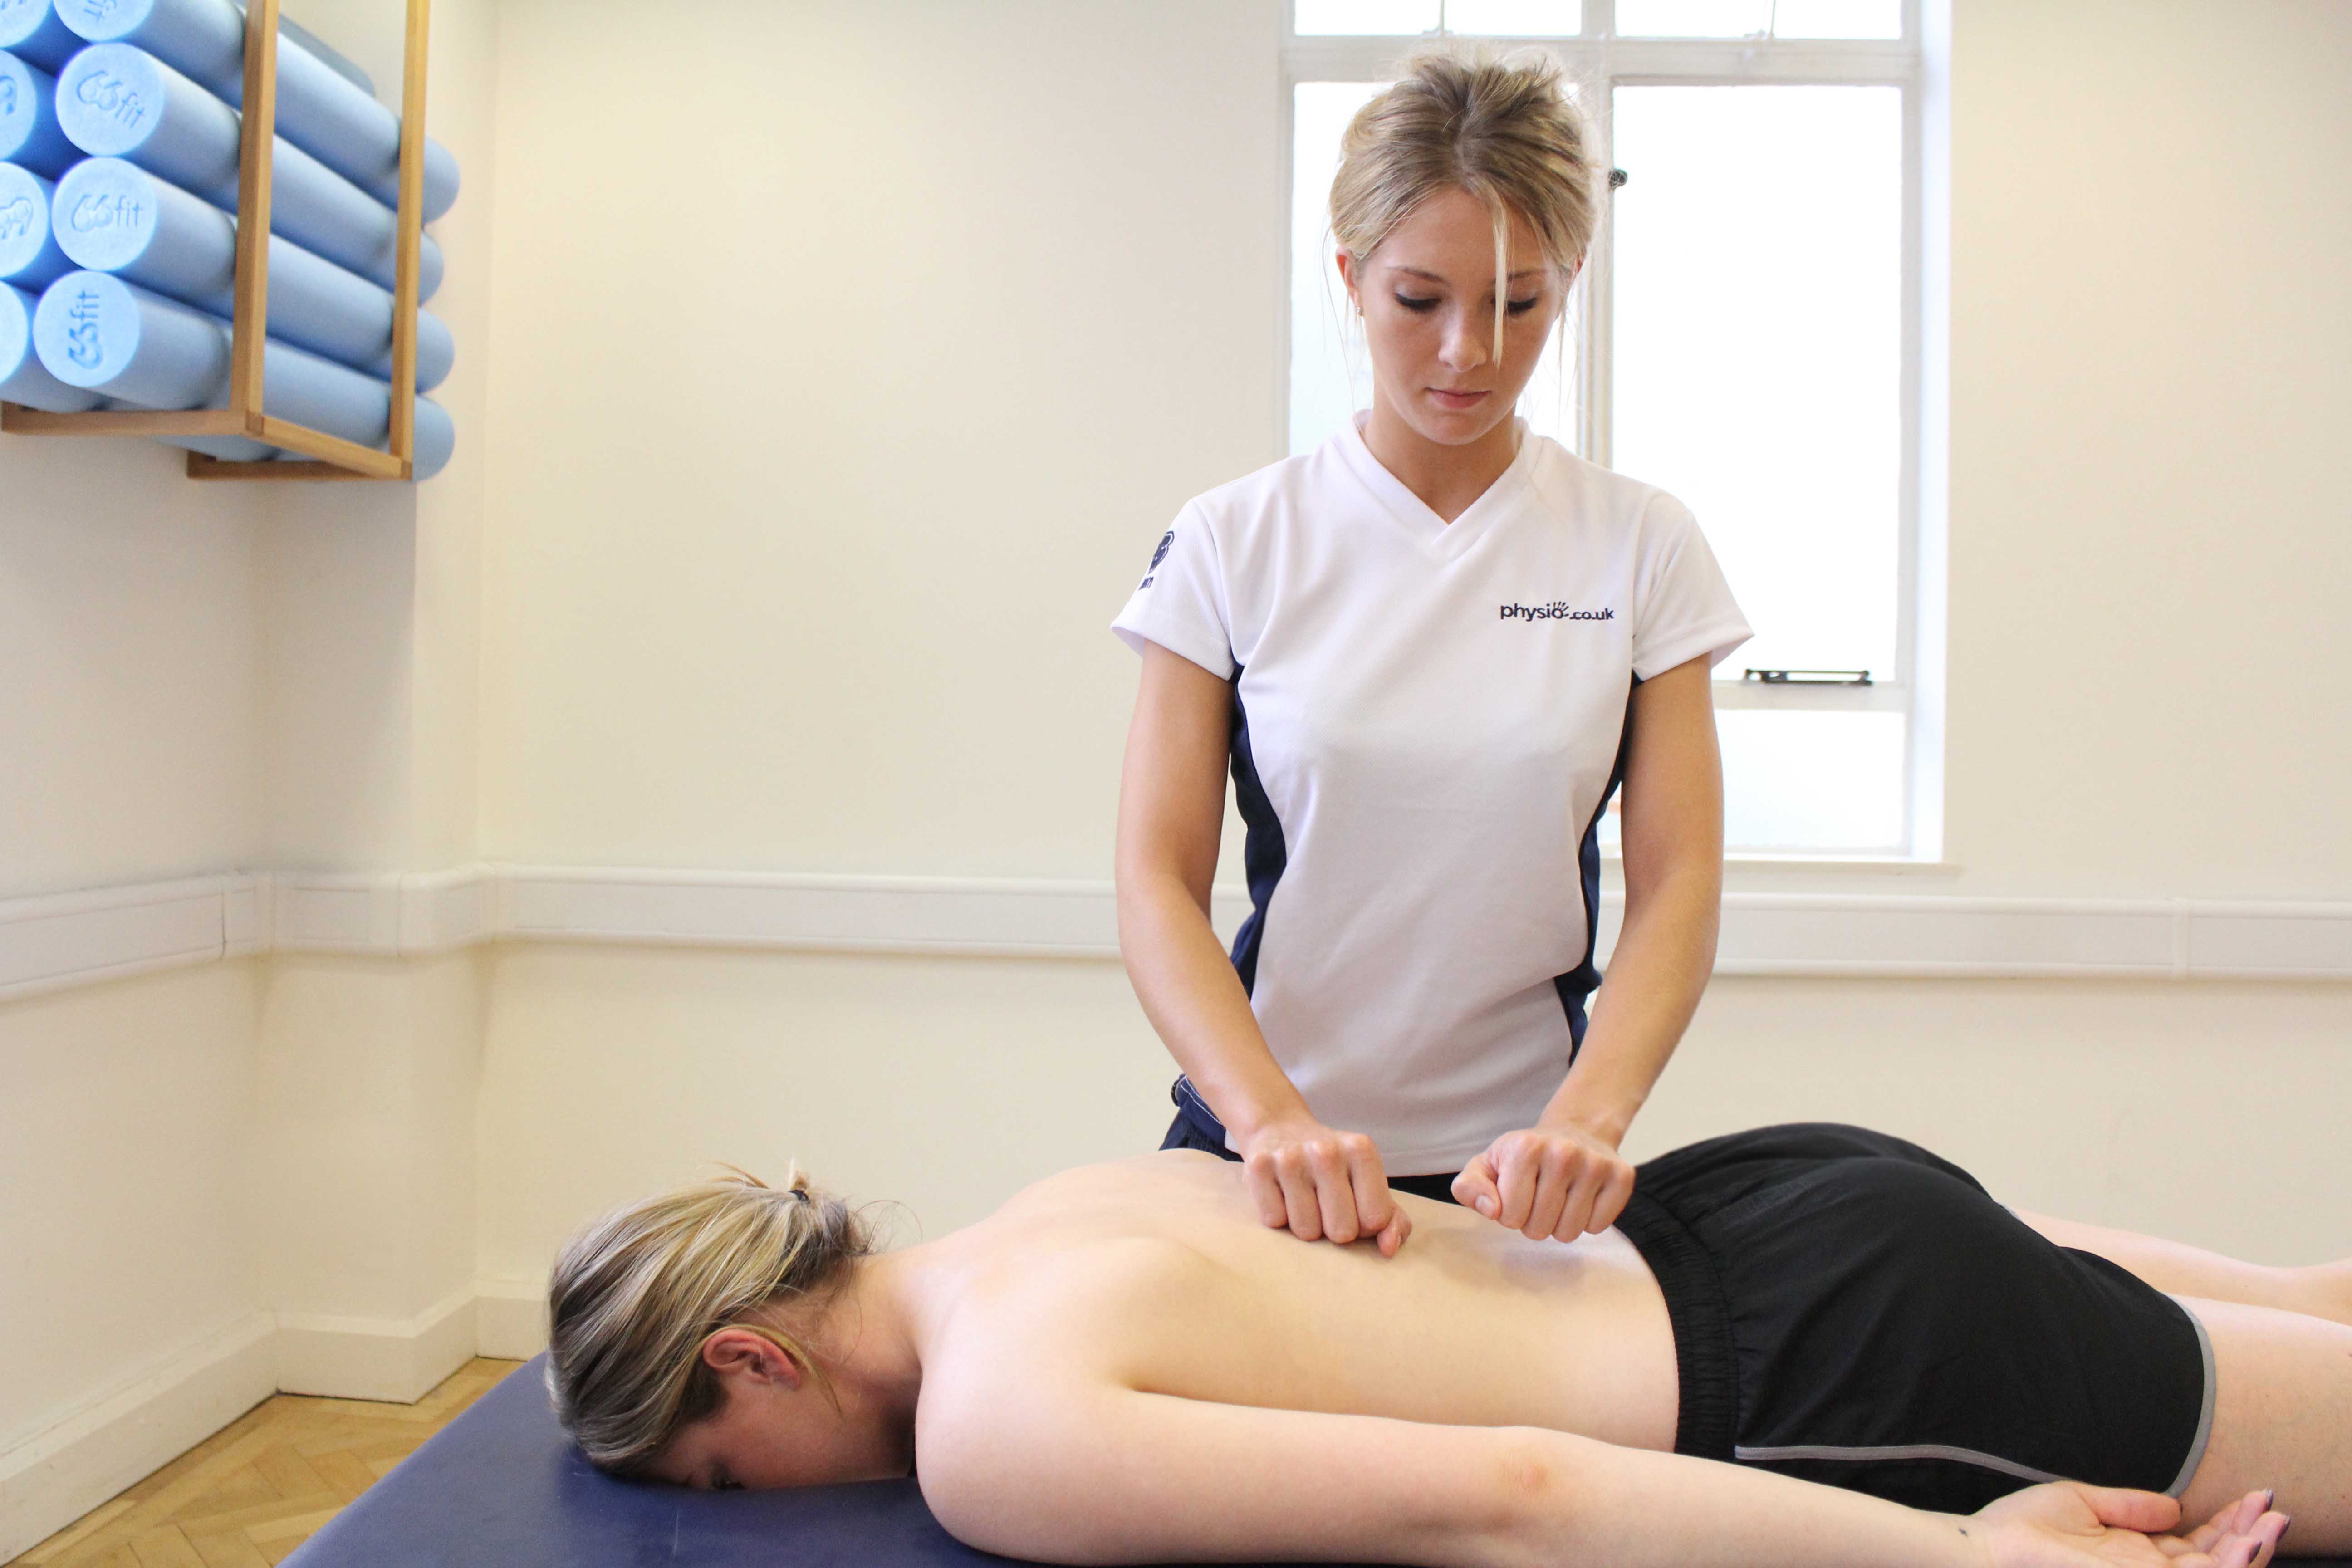 Beating percussion soft tissue massage applied by an experienced therapist